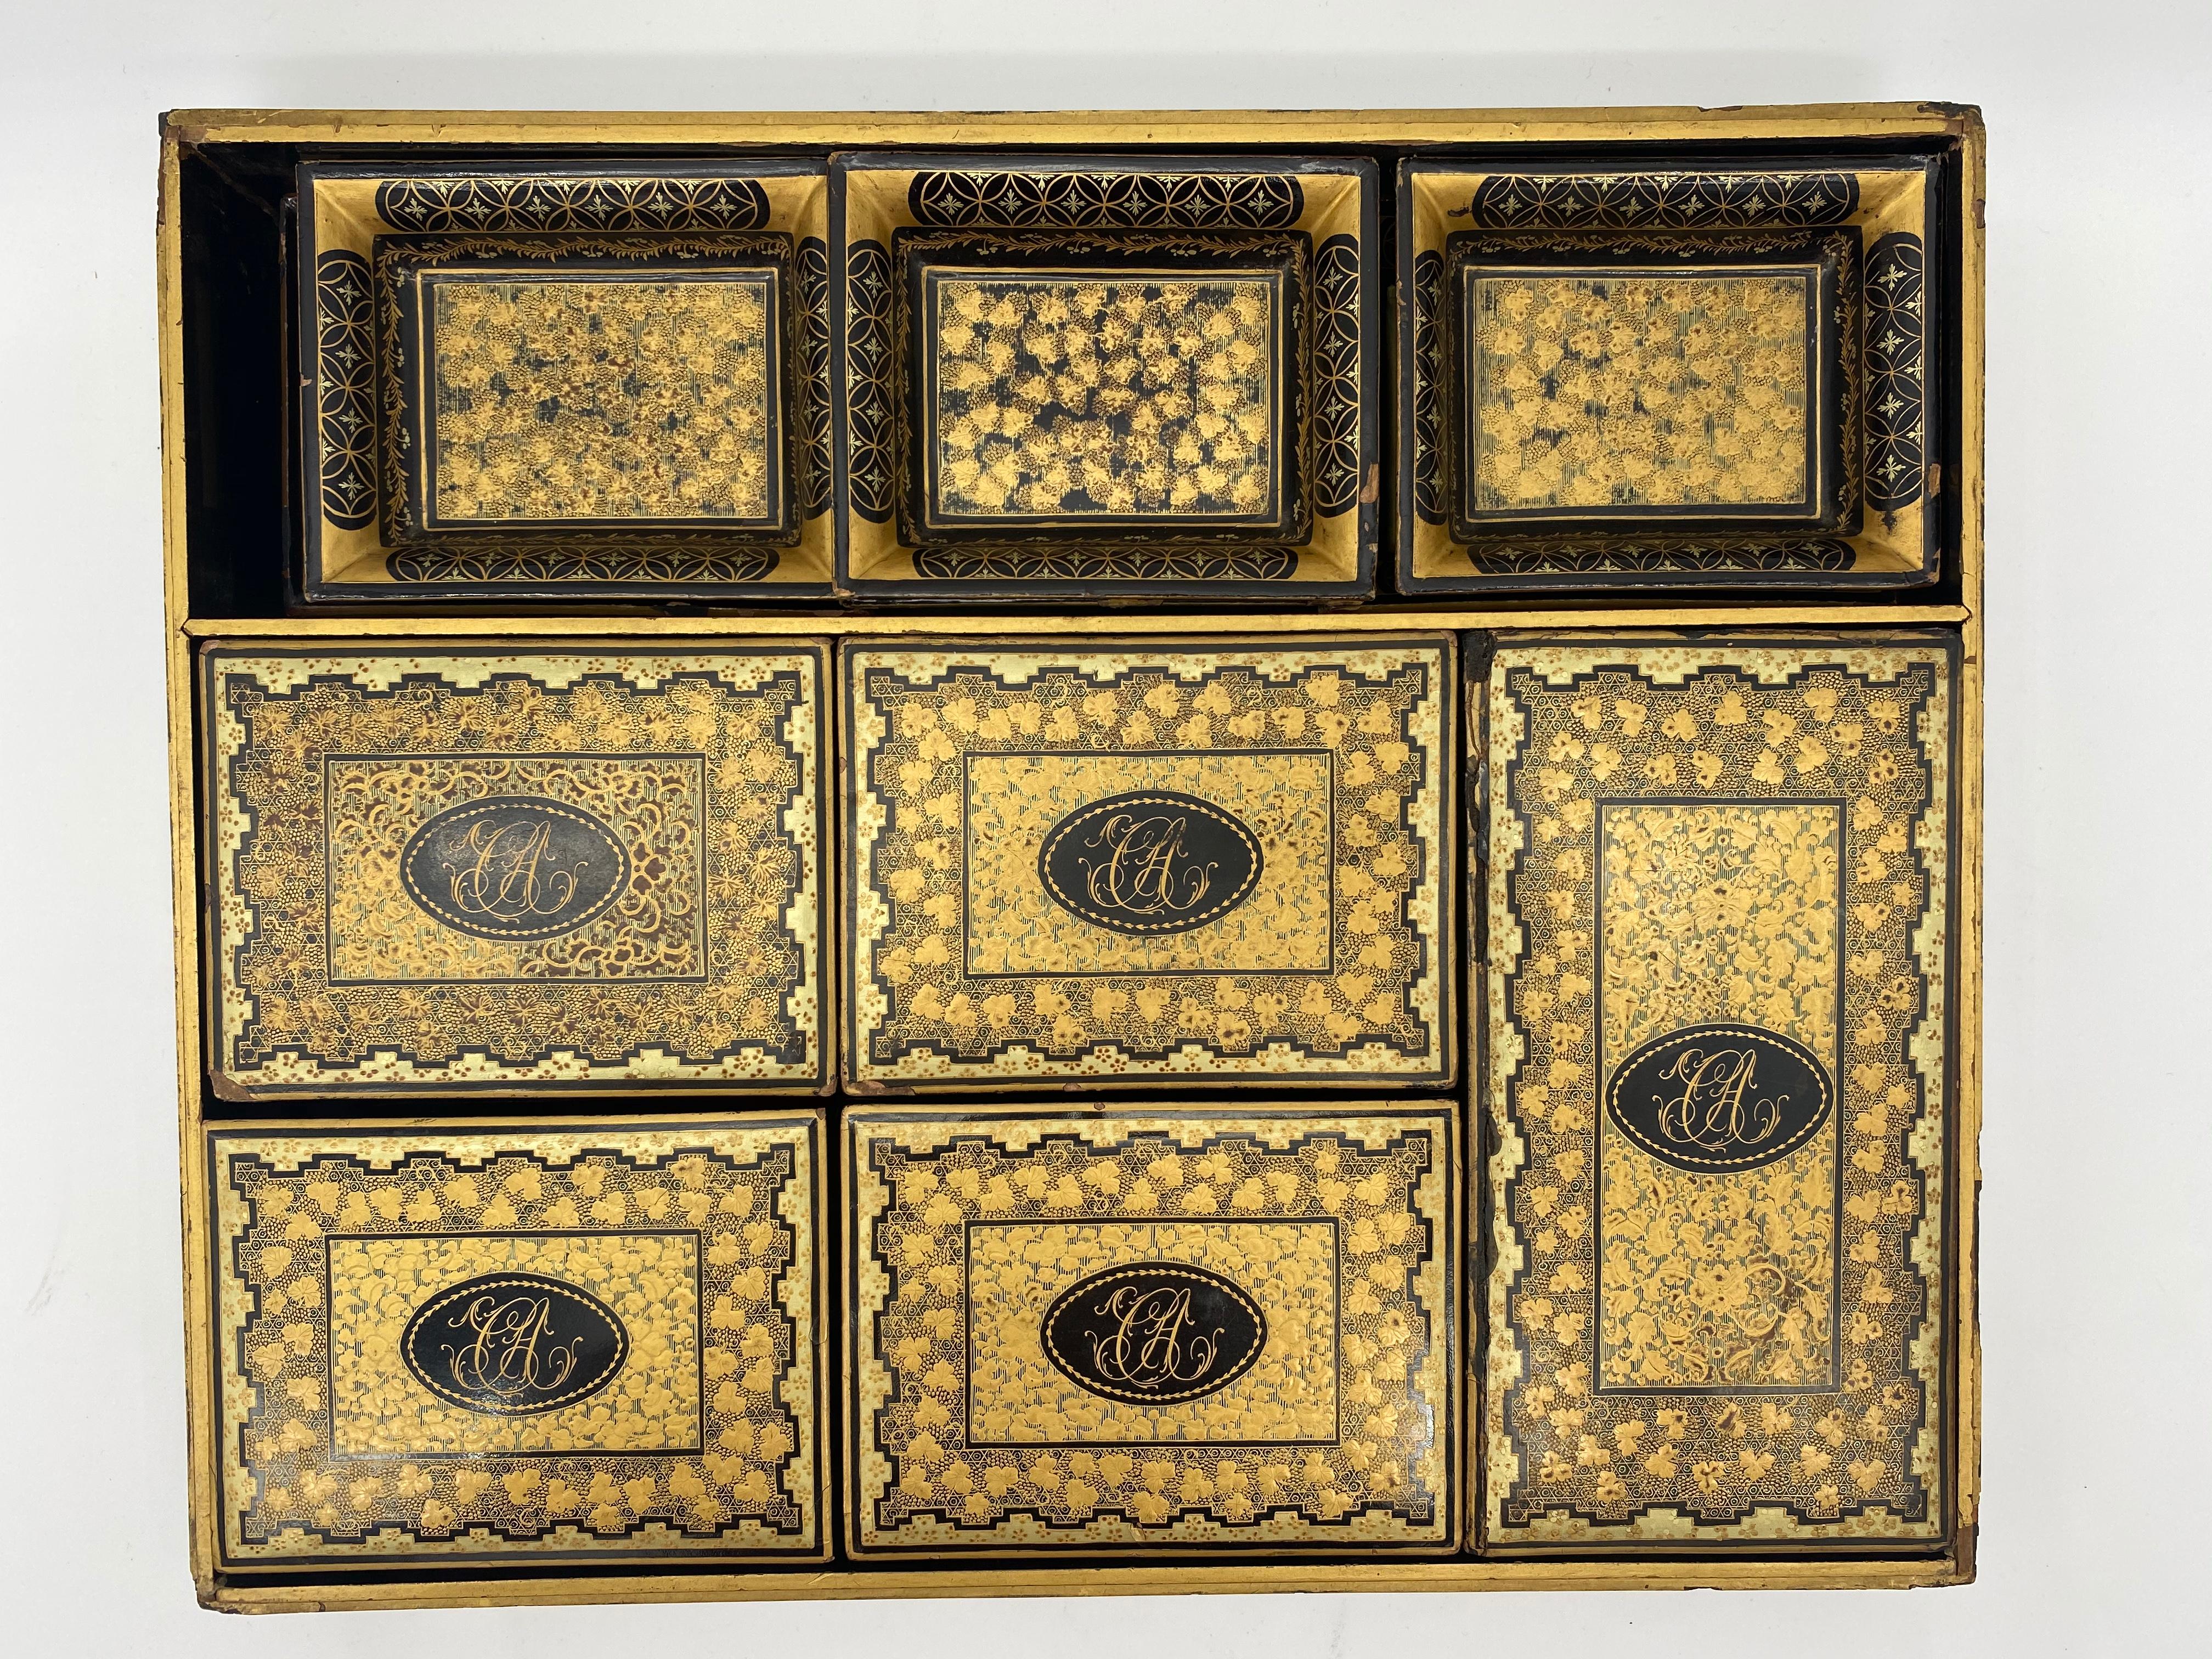 Lacquered 19th Century Chinese Gilt Lacquer Gambling Storage Box Trays and Dishes For Sale